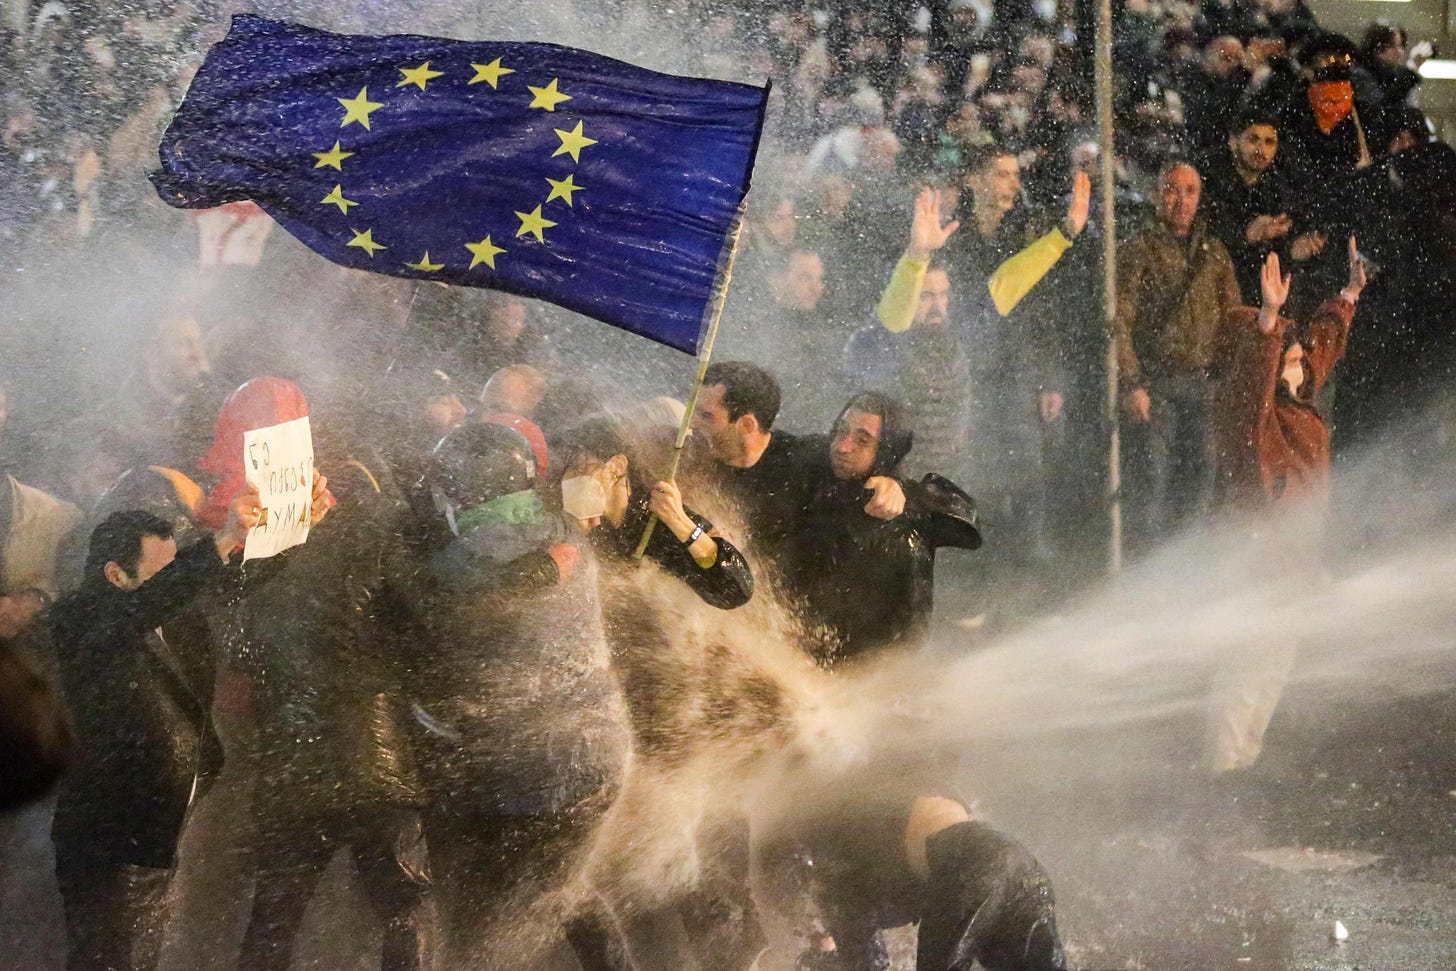 Georgians band together to protect EU flag-wielding protester | World News  | Metro News